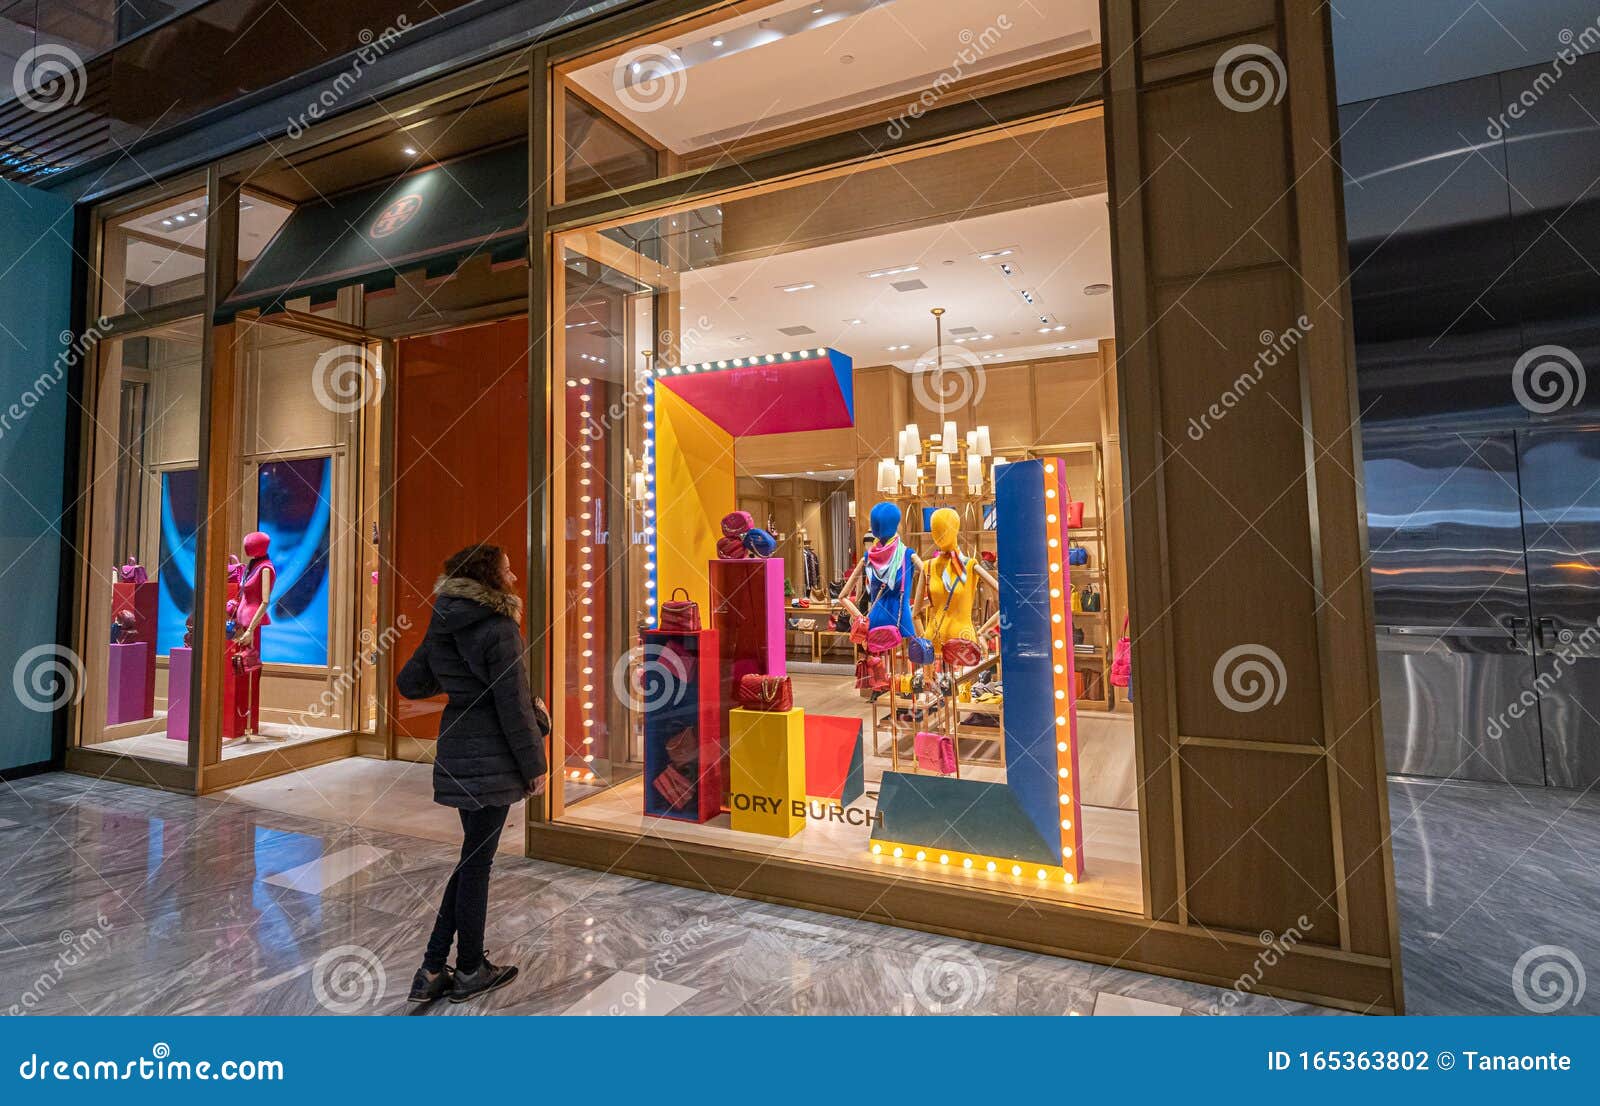 Tory Burch Retail Store Exterior in Hudson Yards Mall Editorial Photography  - Image of front, clothes: 165363802